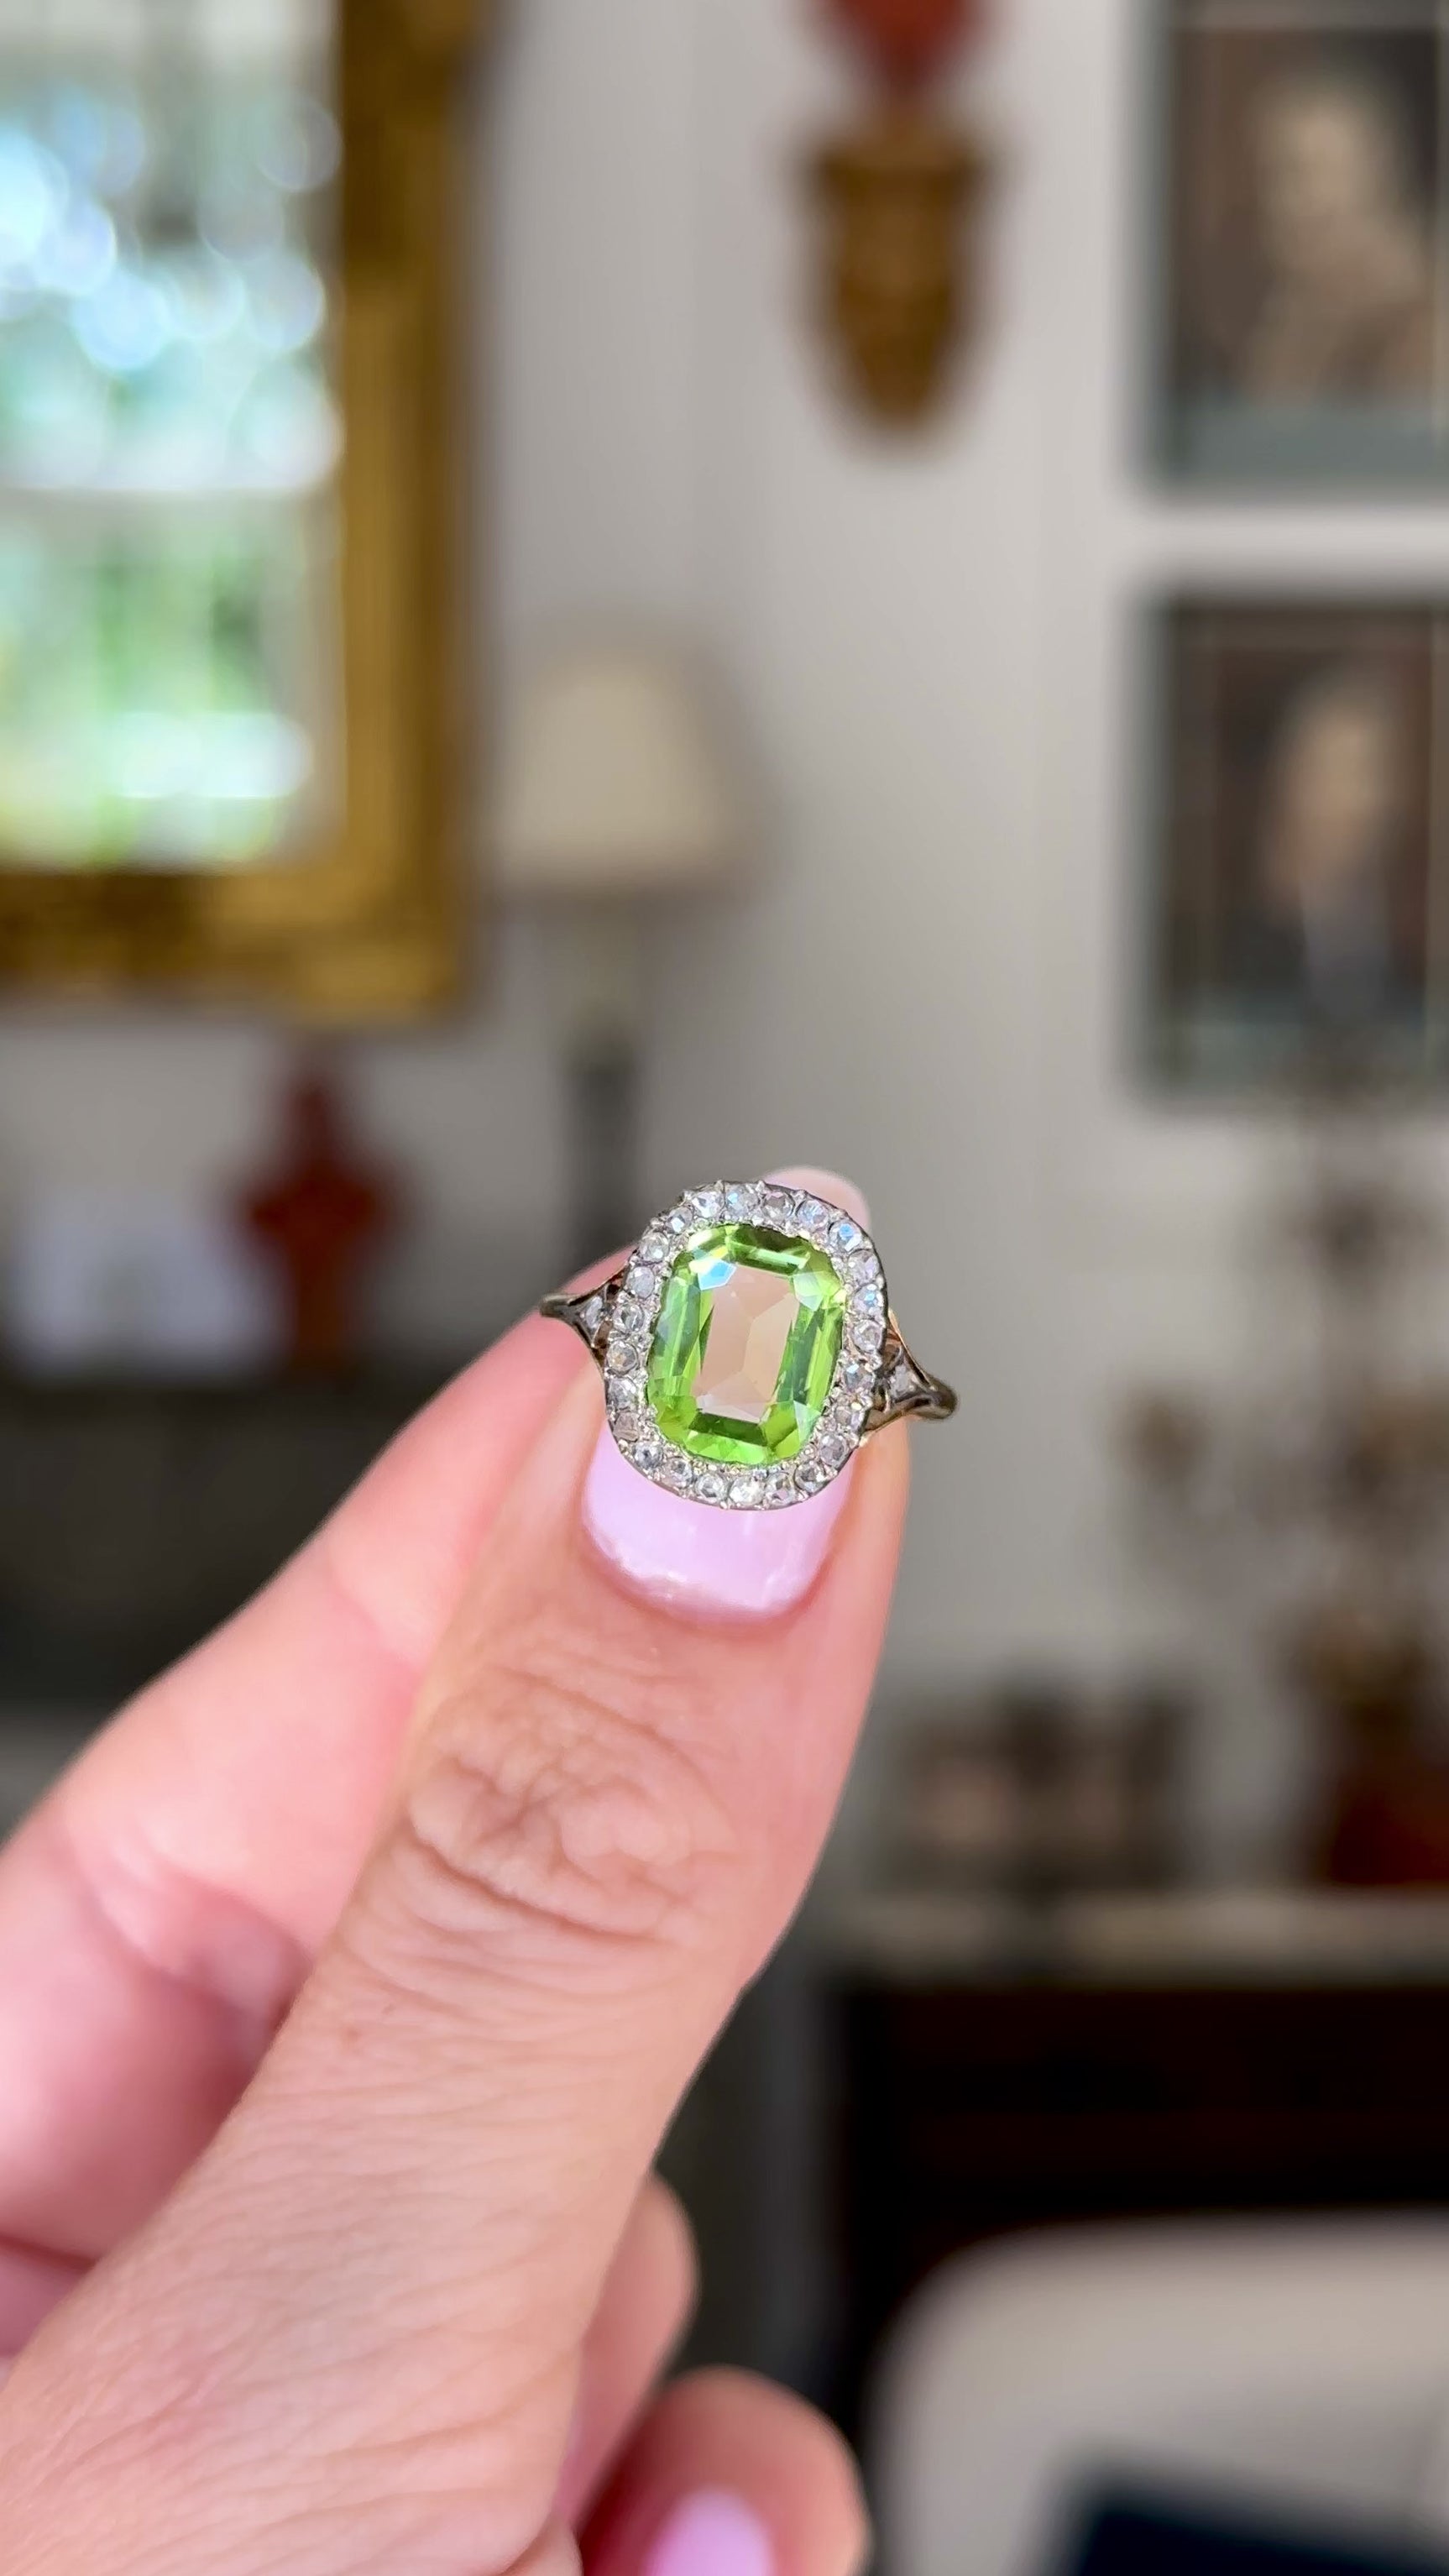 antique peridot and diamond ring, held in fingers and rotated to give perspective, front view.